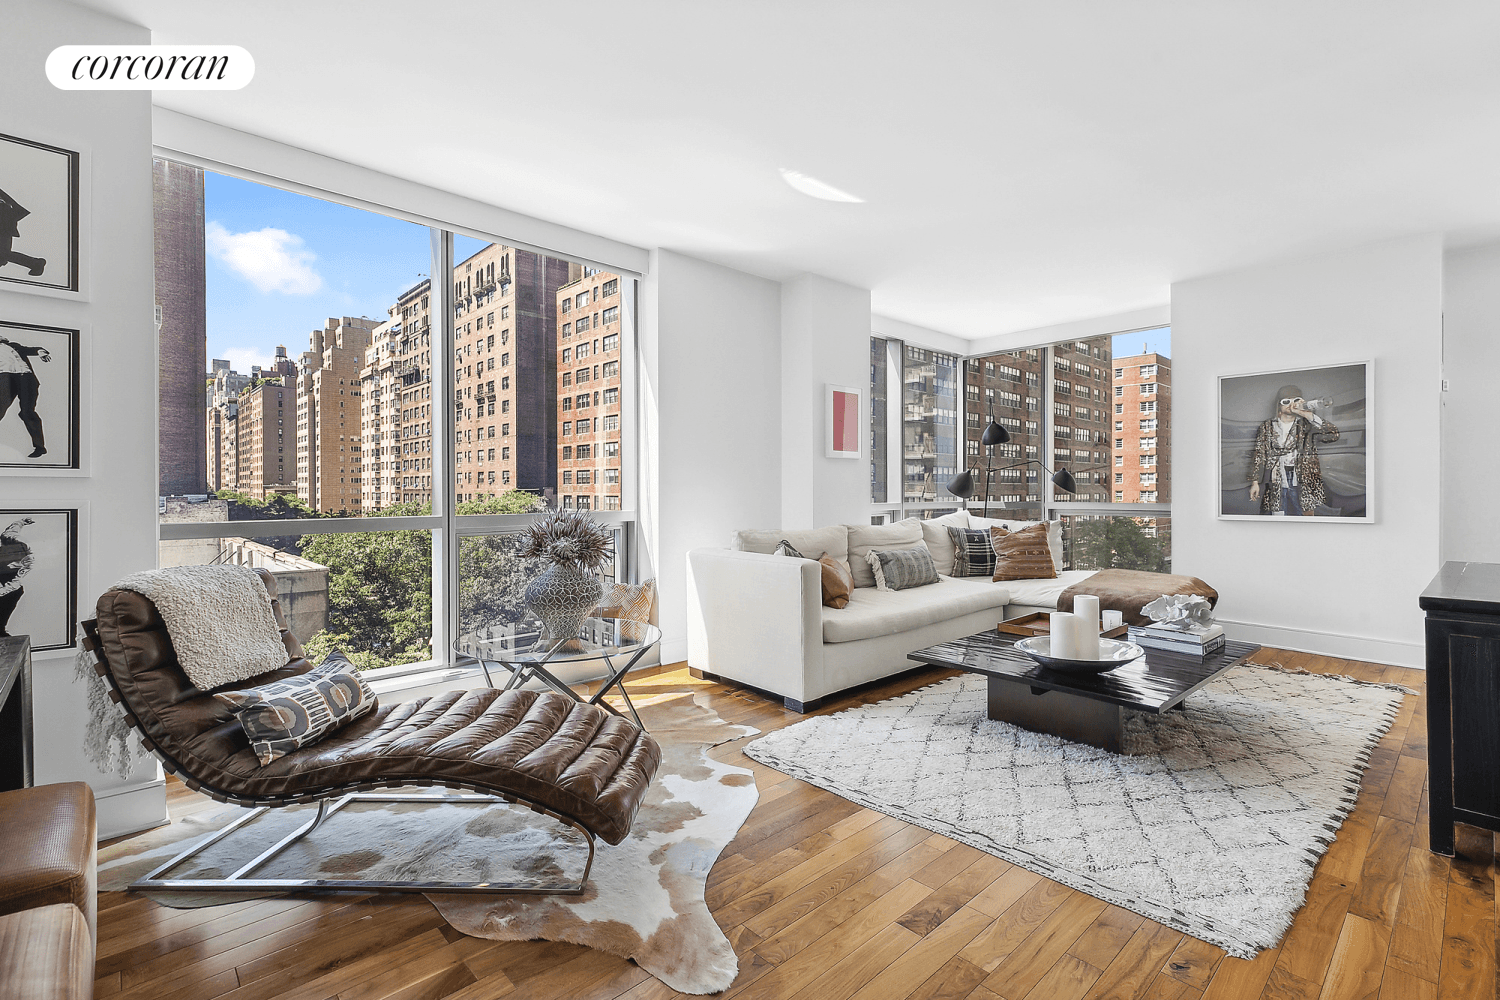 Discover the epitome of Upper East Side living in this exquisite 2 bedroom, 2.